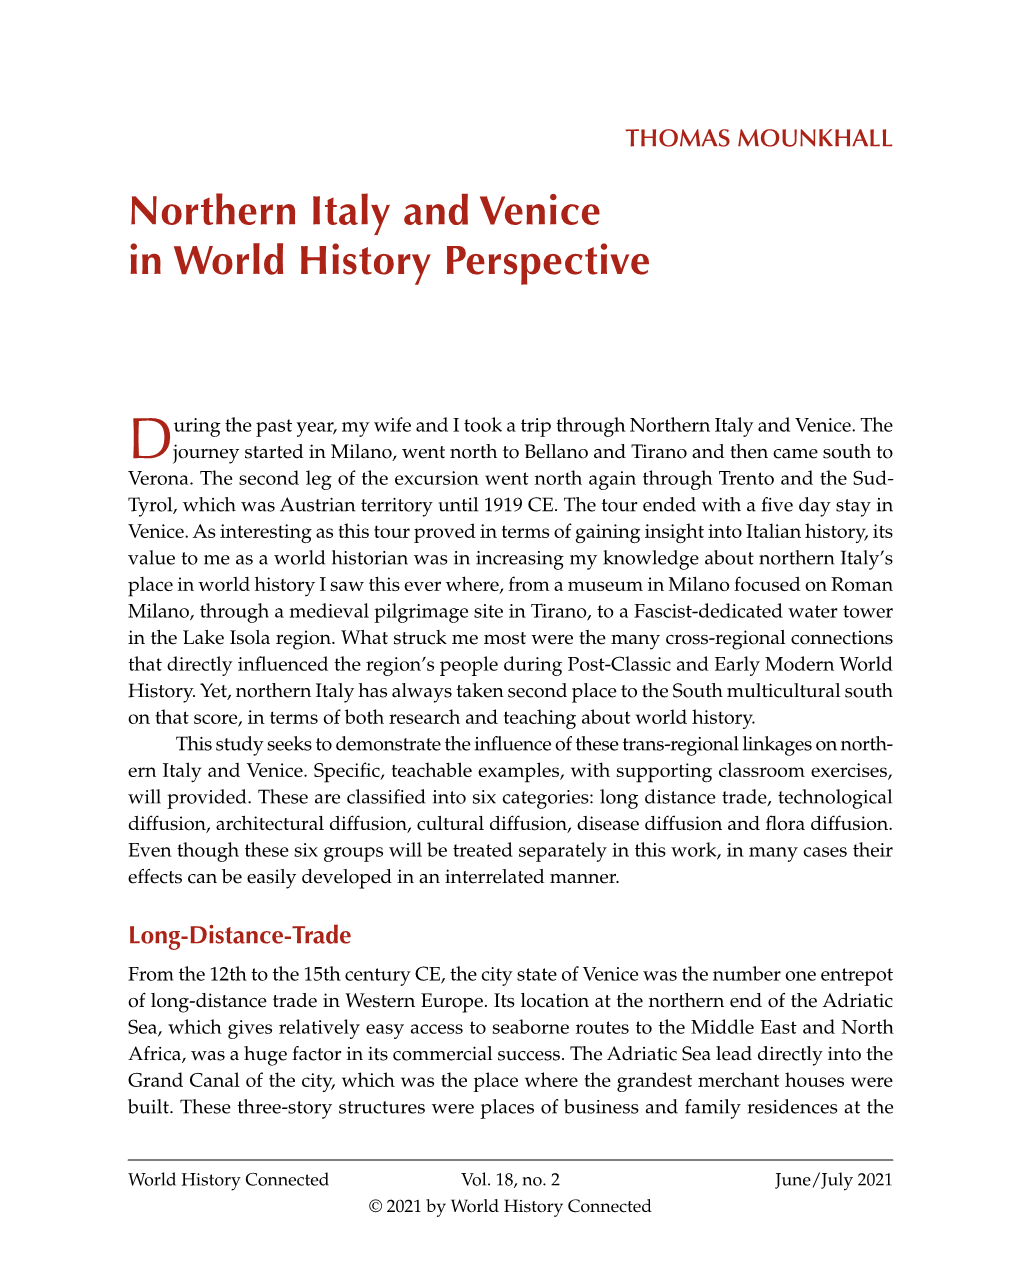 Northern Italy and Venice in World History Perspective